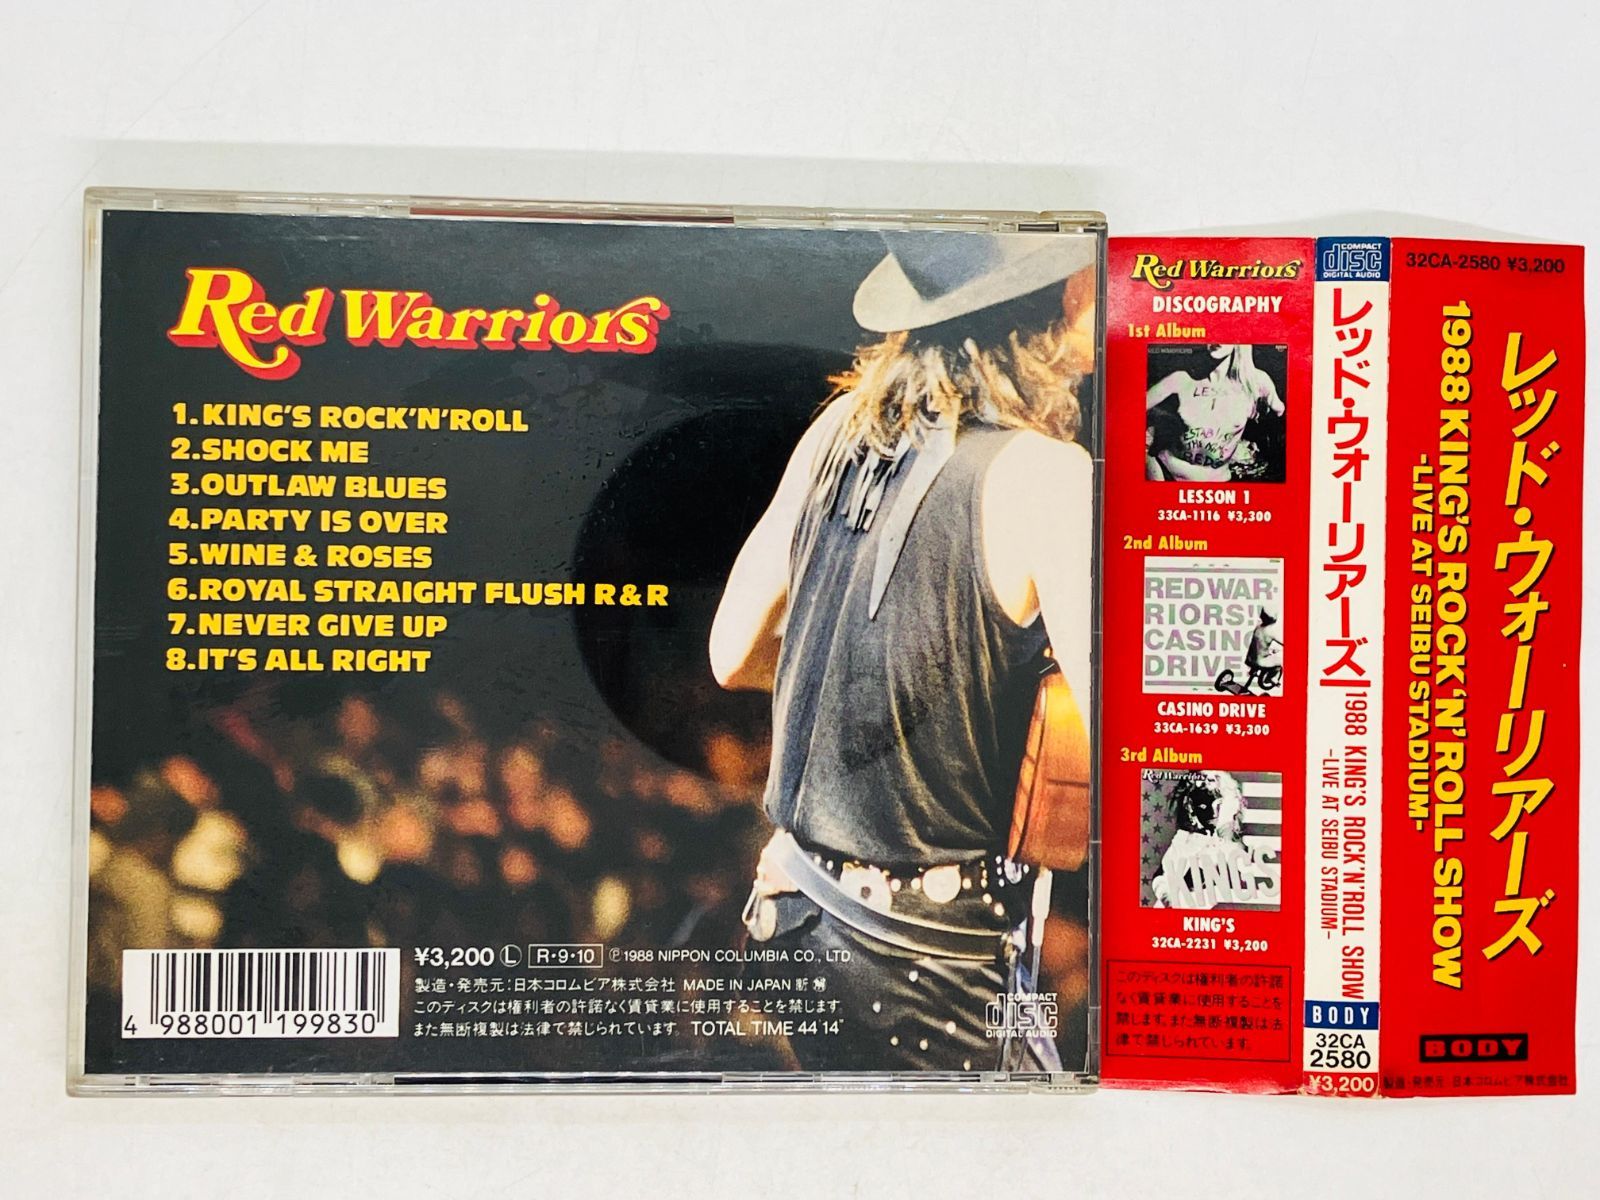 CD 旧規格 レッド・ウォーリアーズ / 1988 KING'S ROCK'N'ROLL SHOW RED WARRIORS / 帯付き 3200円盤  32CA-2580 Z49